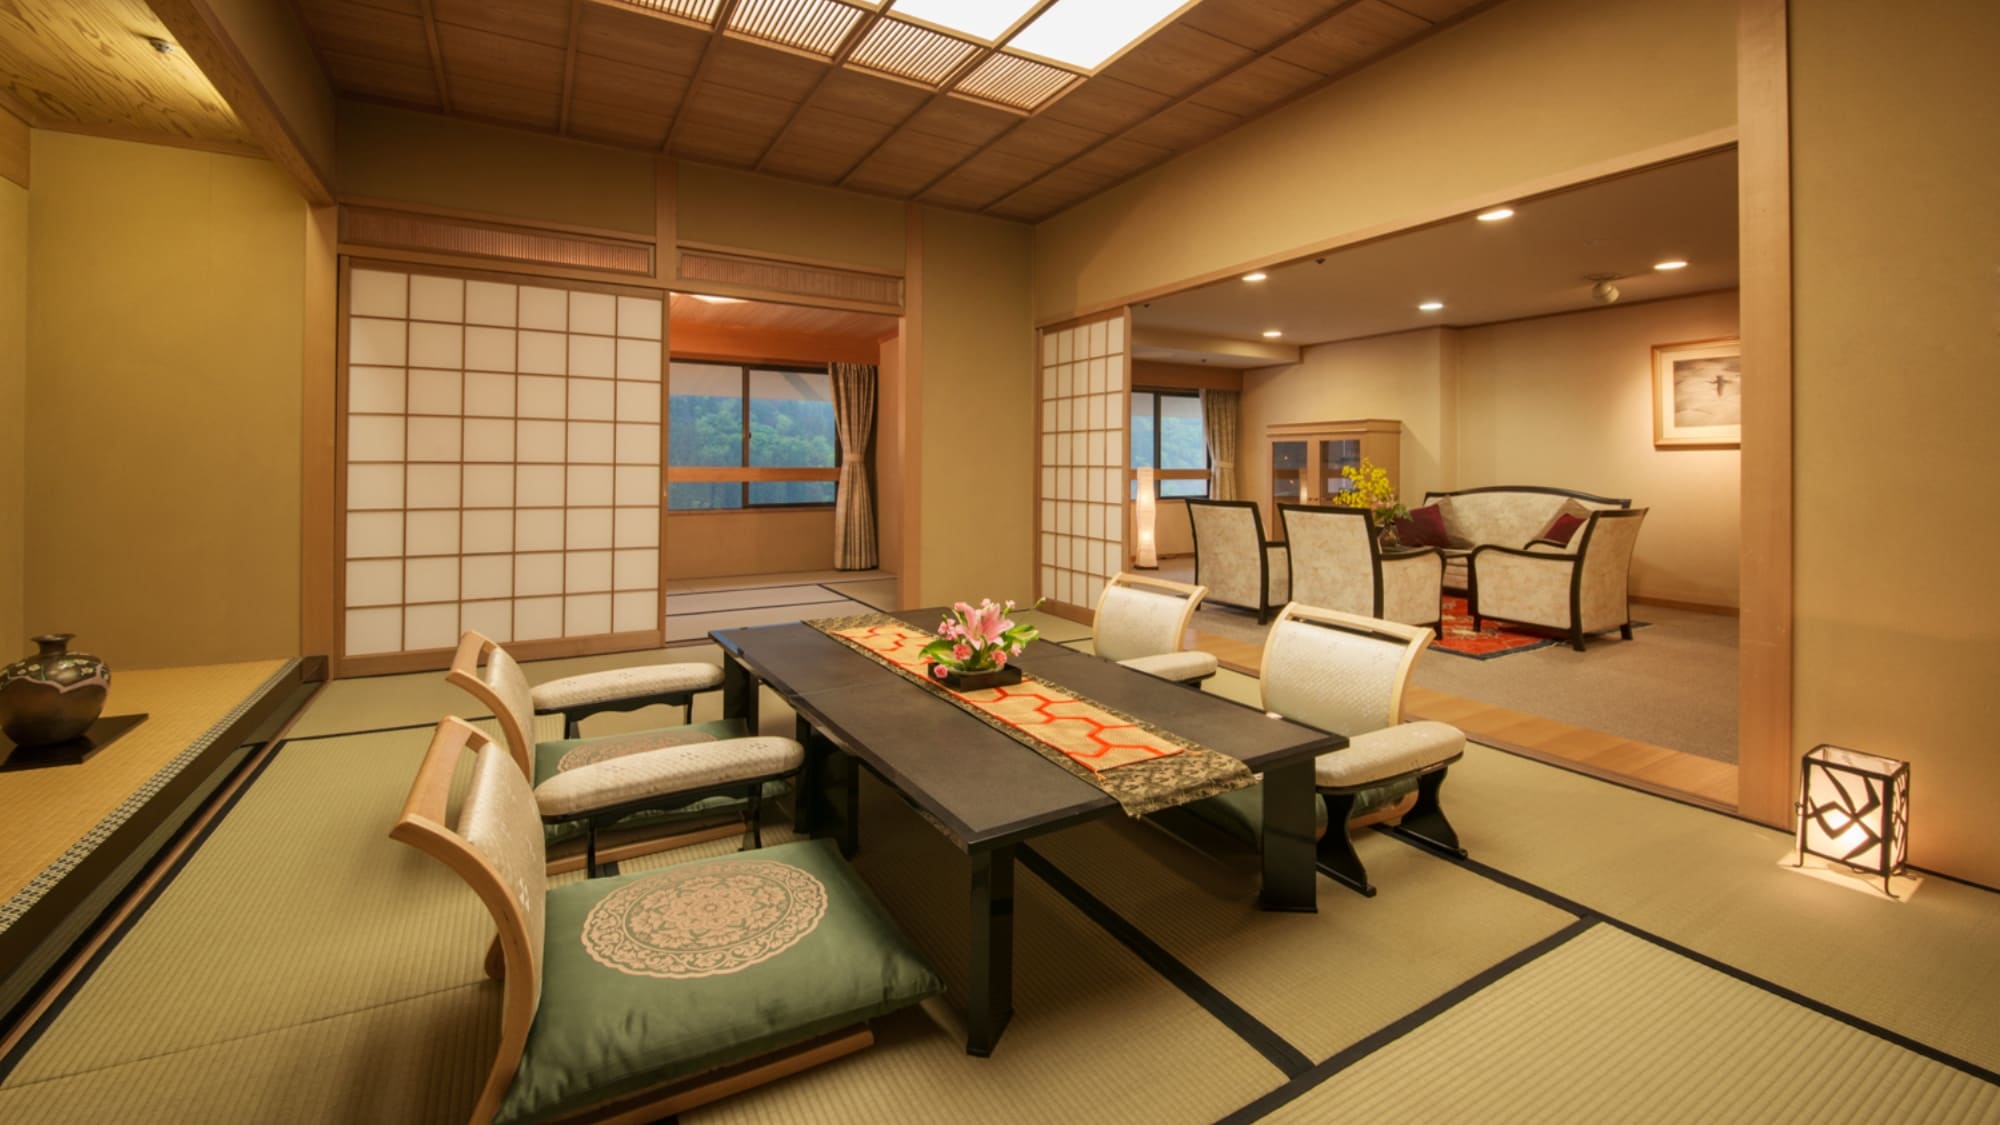  Special room "Kikusui" on the top floor of Daikanso ◆ Japanese-style room with a wide edge of 12 tatami mats + 6 tatami mats ◆